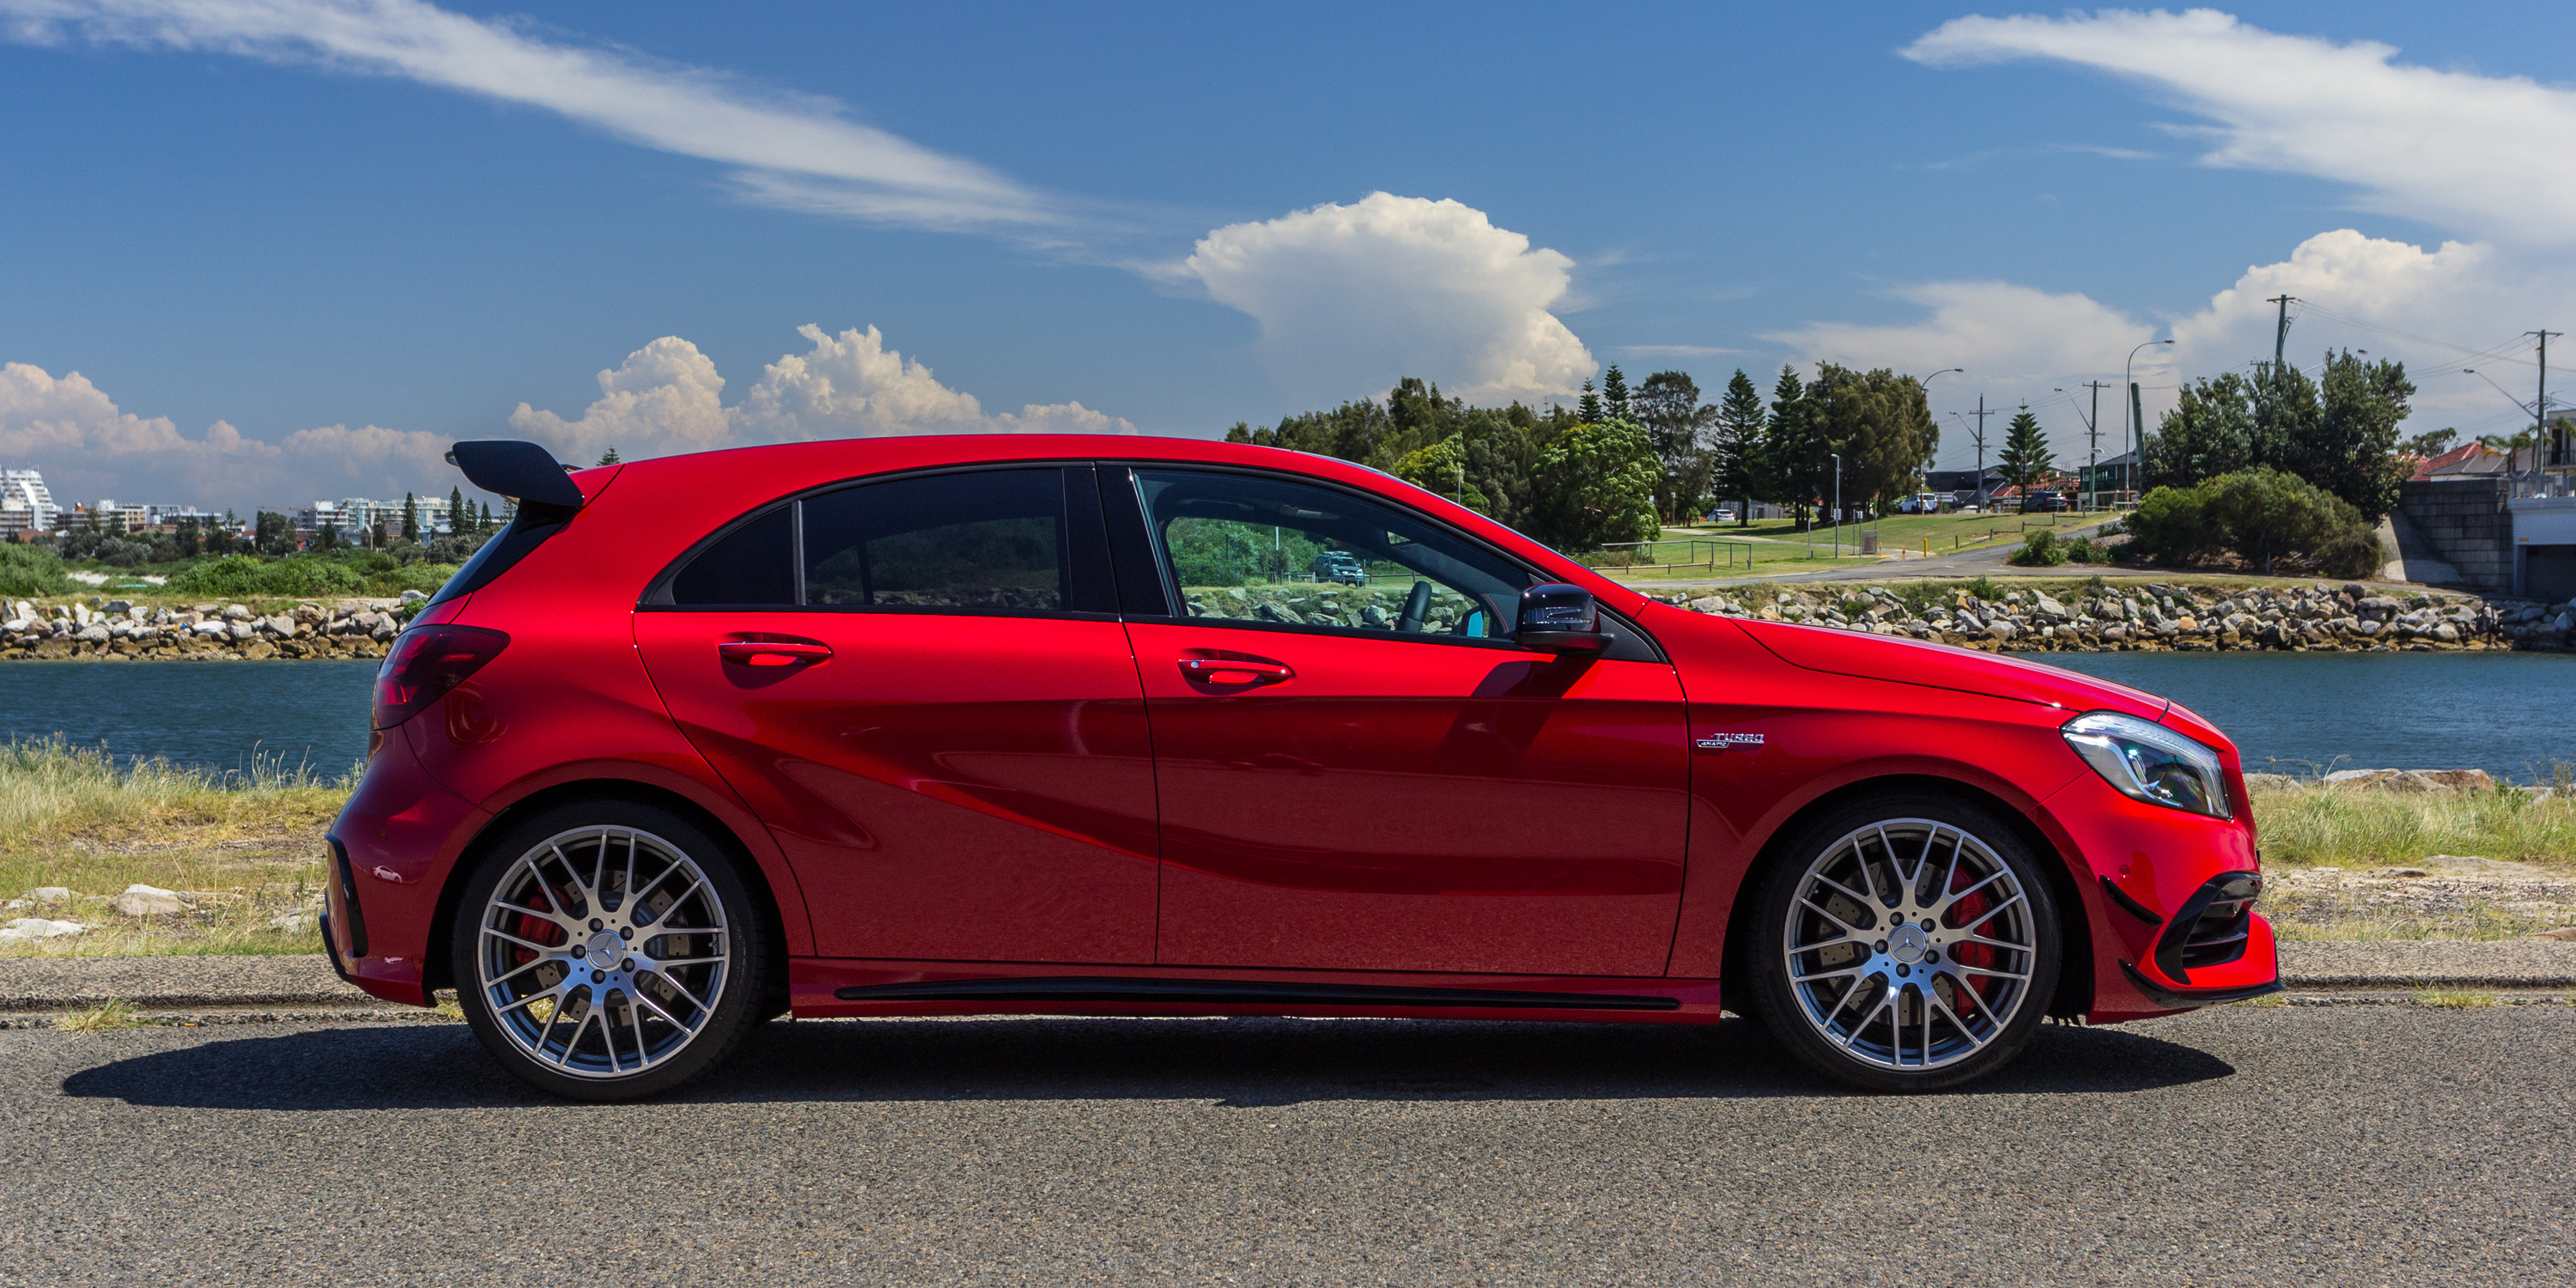 2016 Mercedes AMG A45 4Matic Review photos CarAdvice